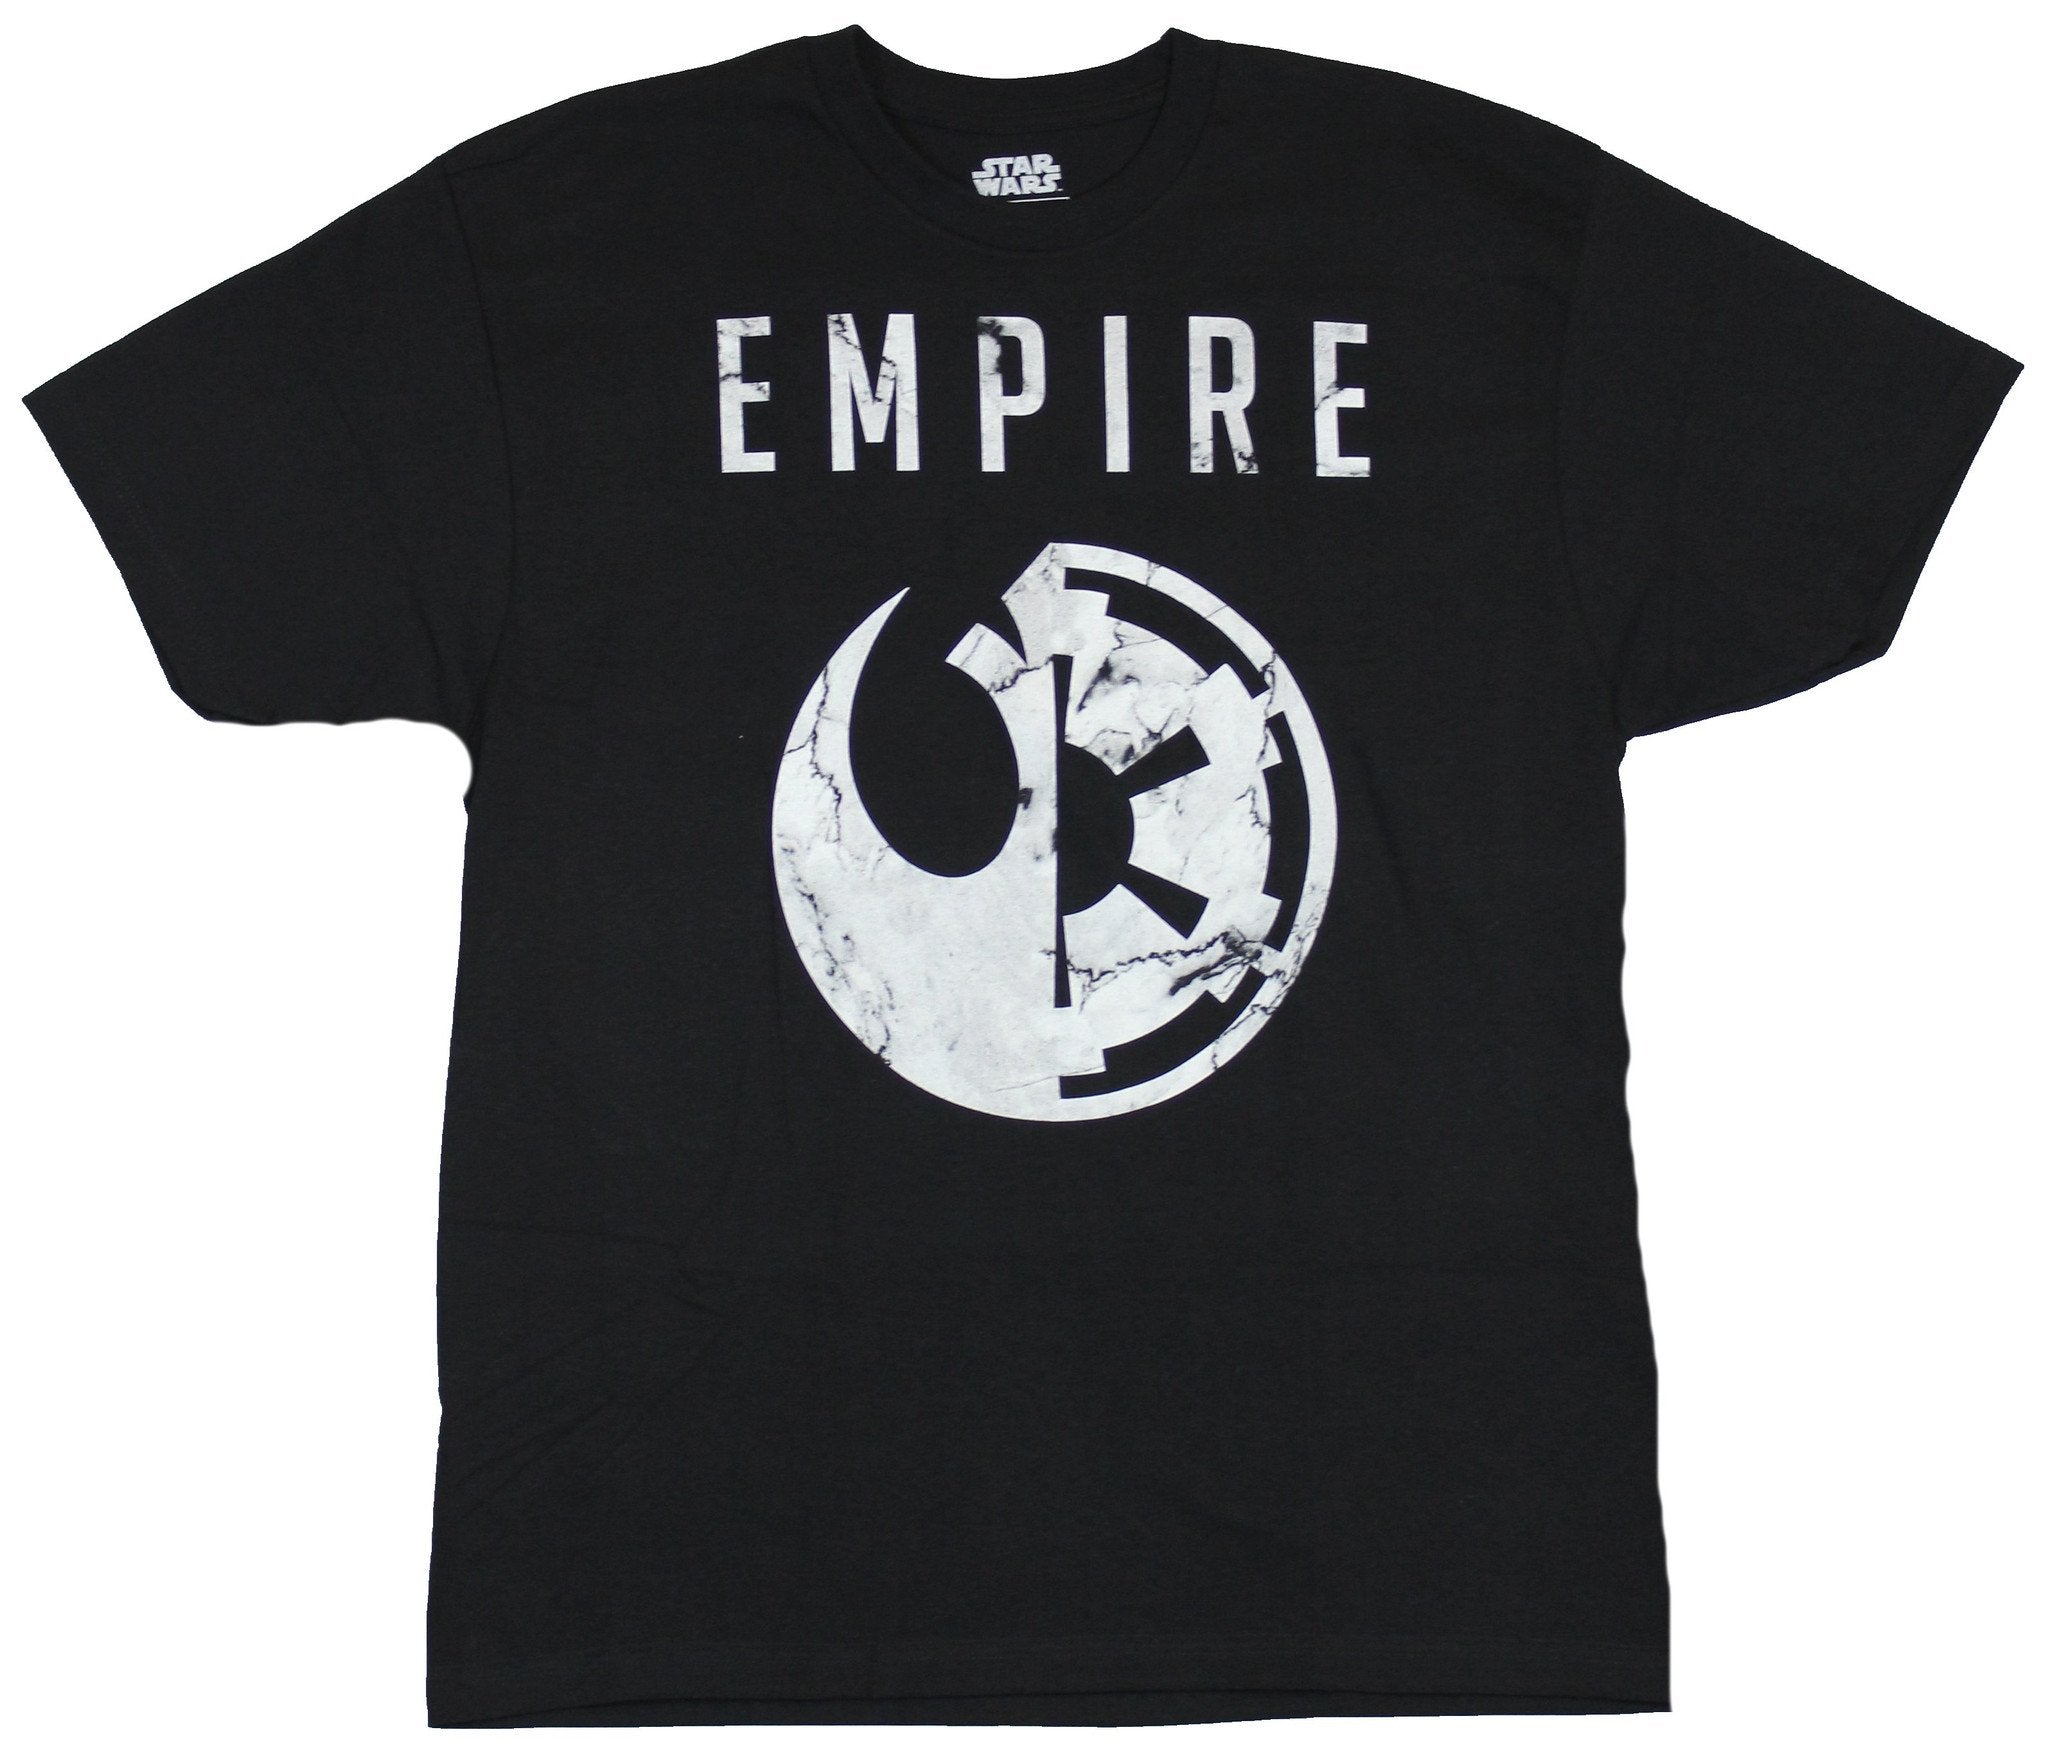 Star Wars Mens T-Shirt - Empire Logo of Rebel Alliance and Empire Halved